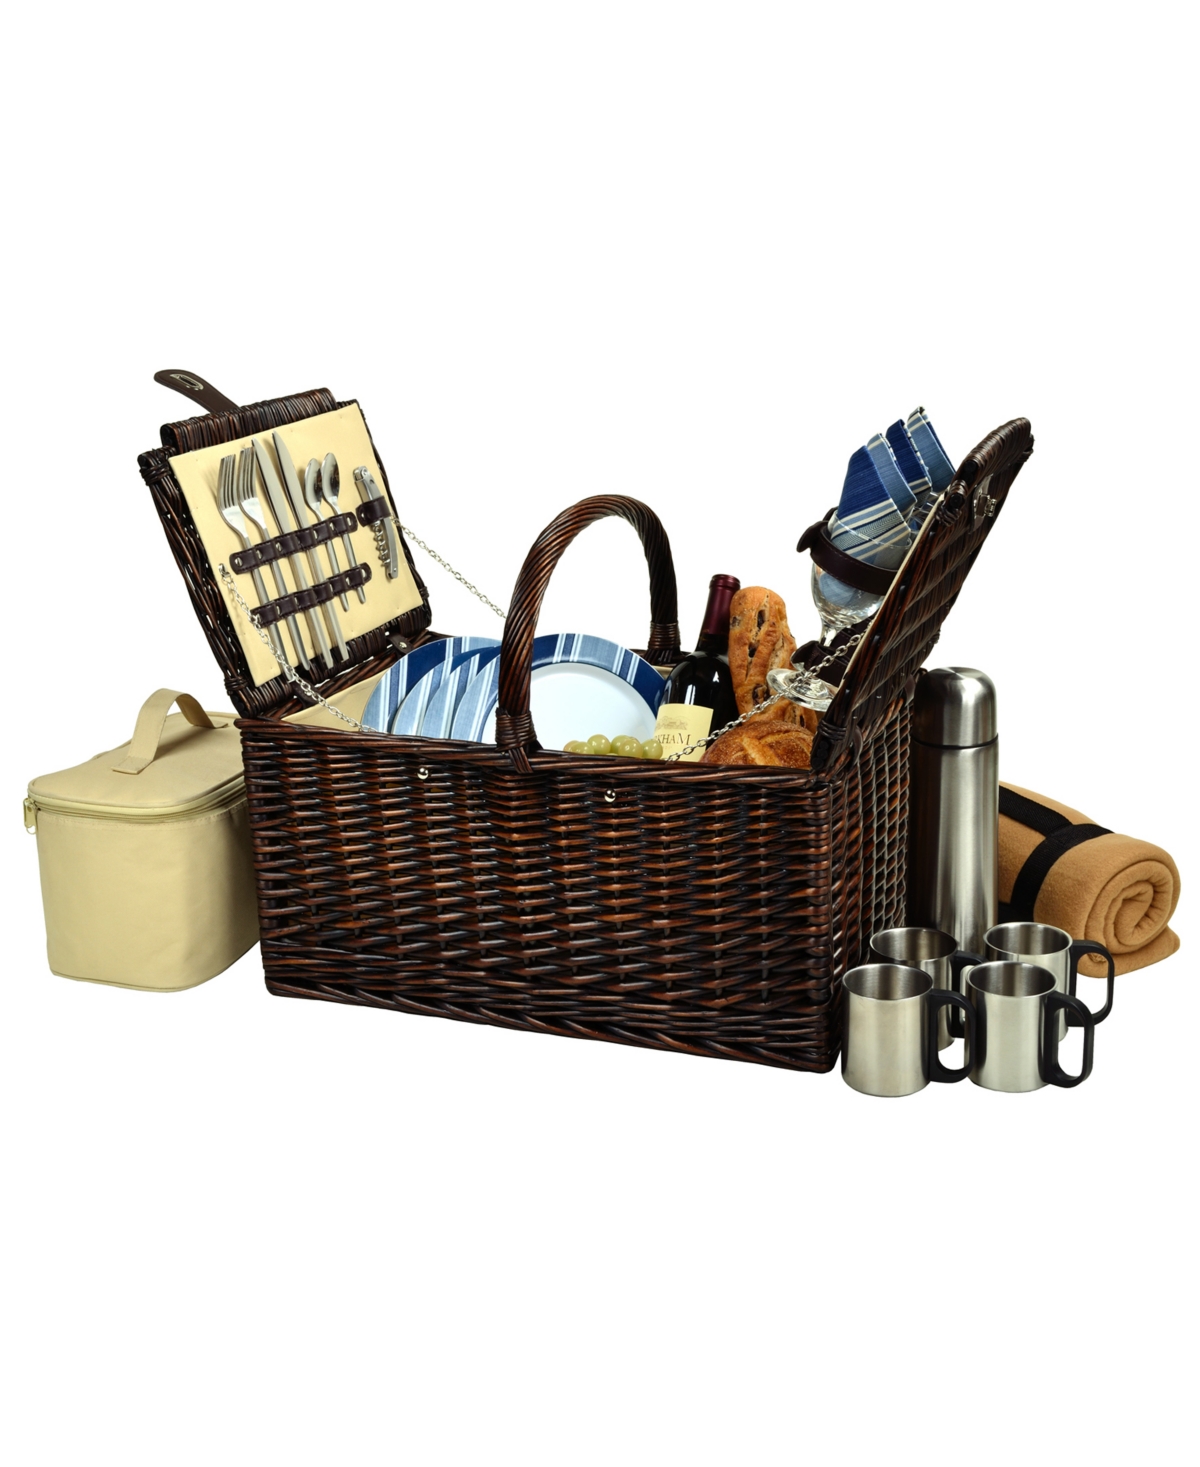 Buckingham Willow Picnic, Coffee Basket for 4 with Blanket - Orange